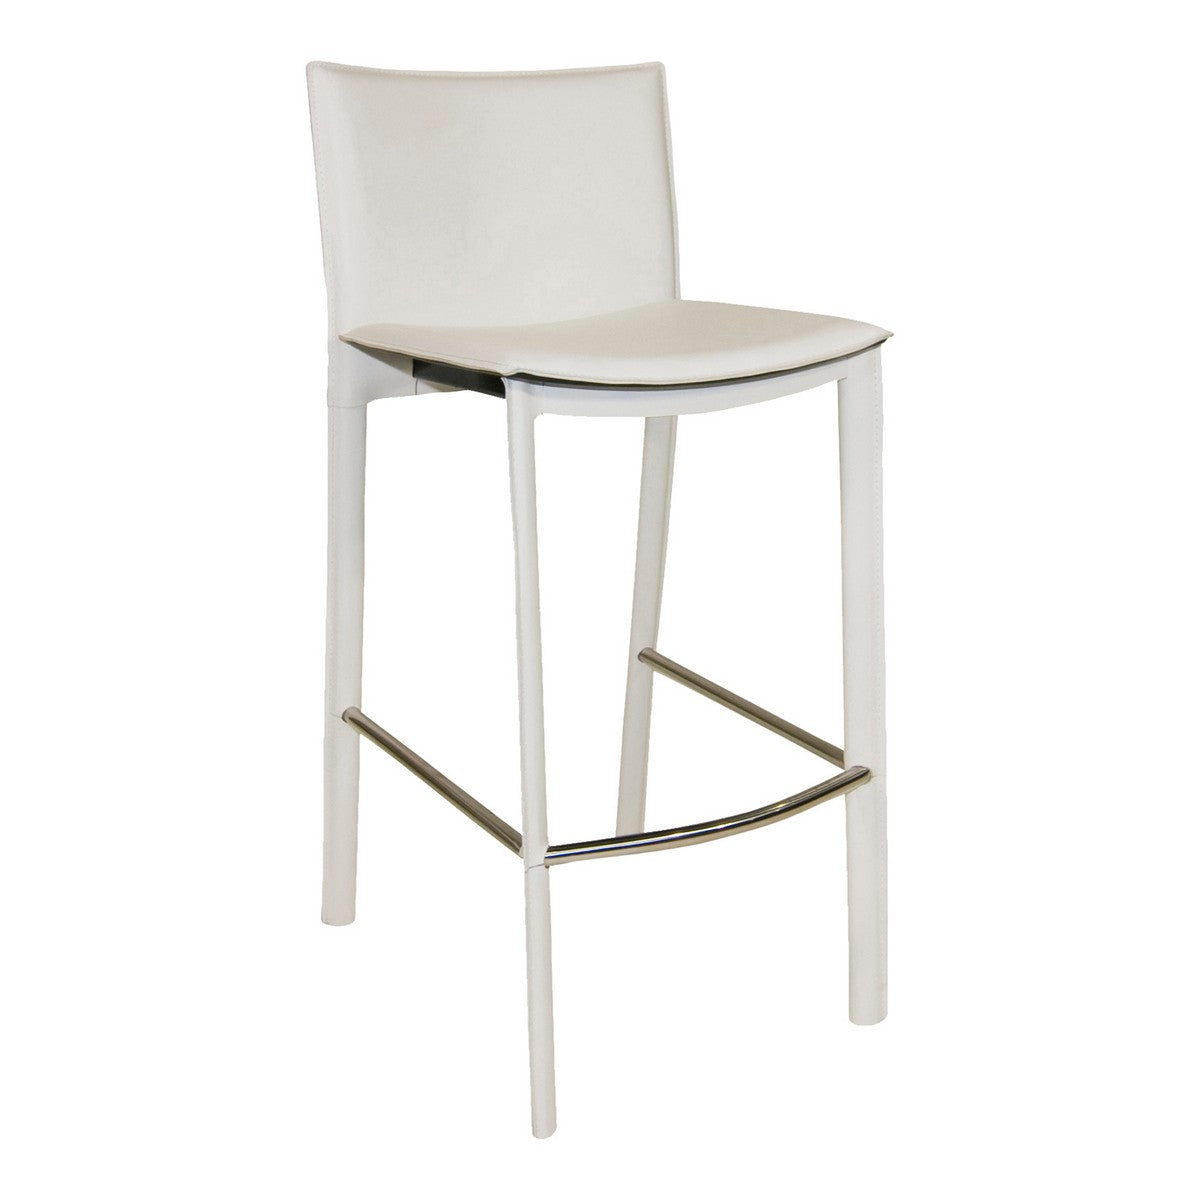 Moe's Home Collection Panca Counter Stool 26" White - EH-1034-18 - Moe's Home Collection - Counter Stools - Minimal And Modern - 1